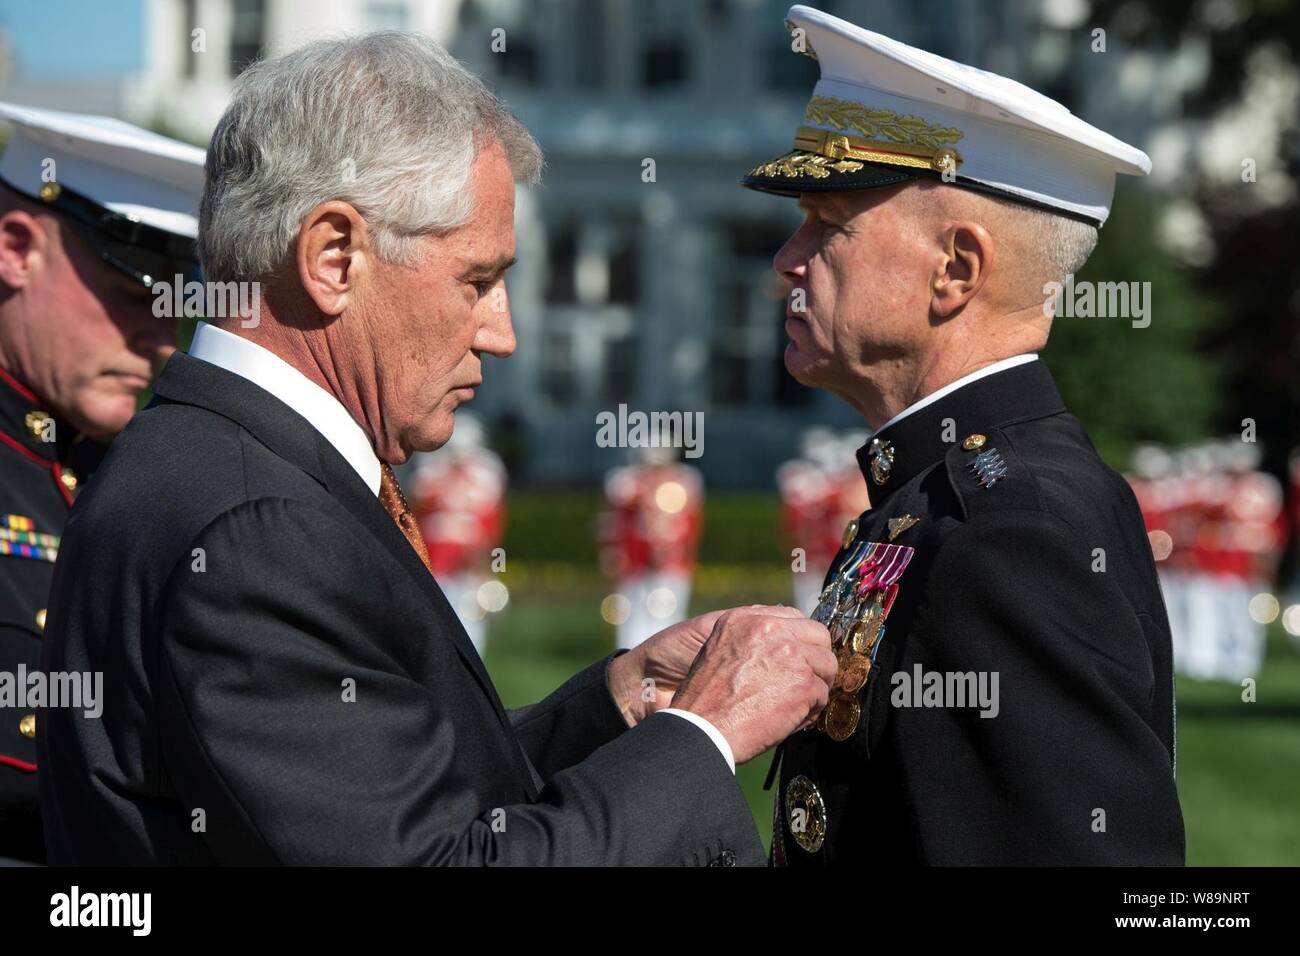 Defense Secretary Chuck Hagel pins a medal on outgoing Marine Corps Commandant Gen. James F. Amos during a change-of-command ceremony on Marine Barracks in Washington, D.C 141017-N-AF077-131c. Stock Photo